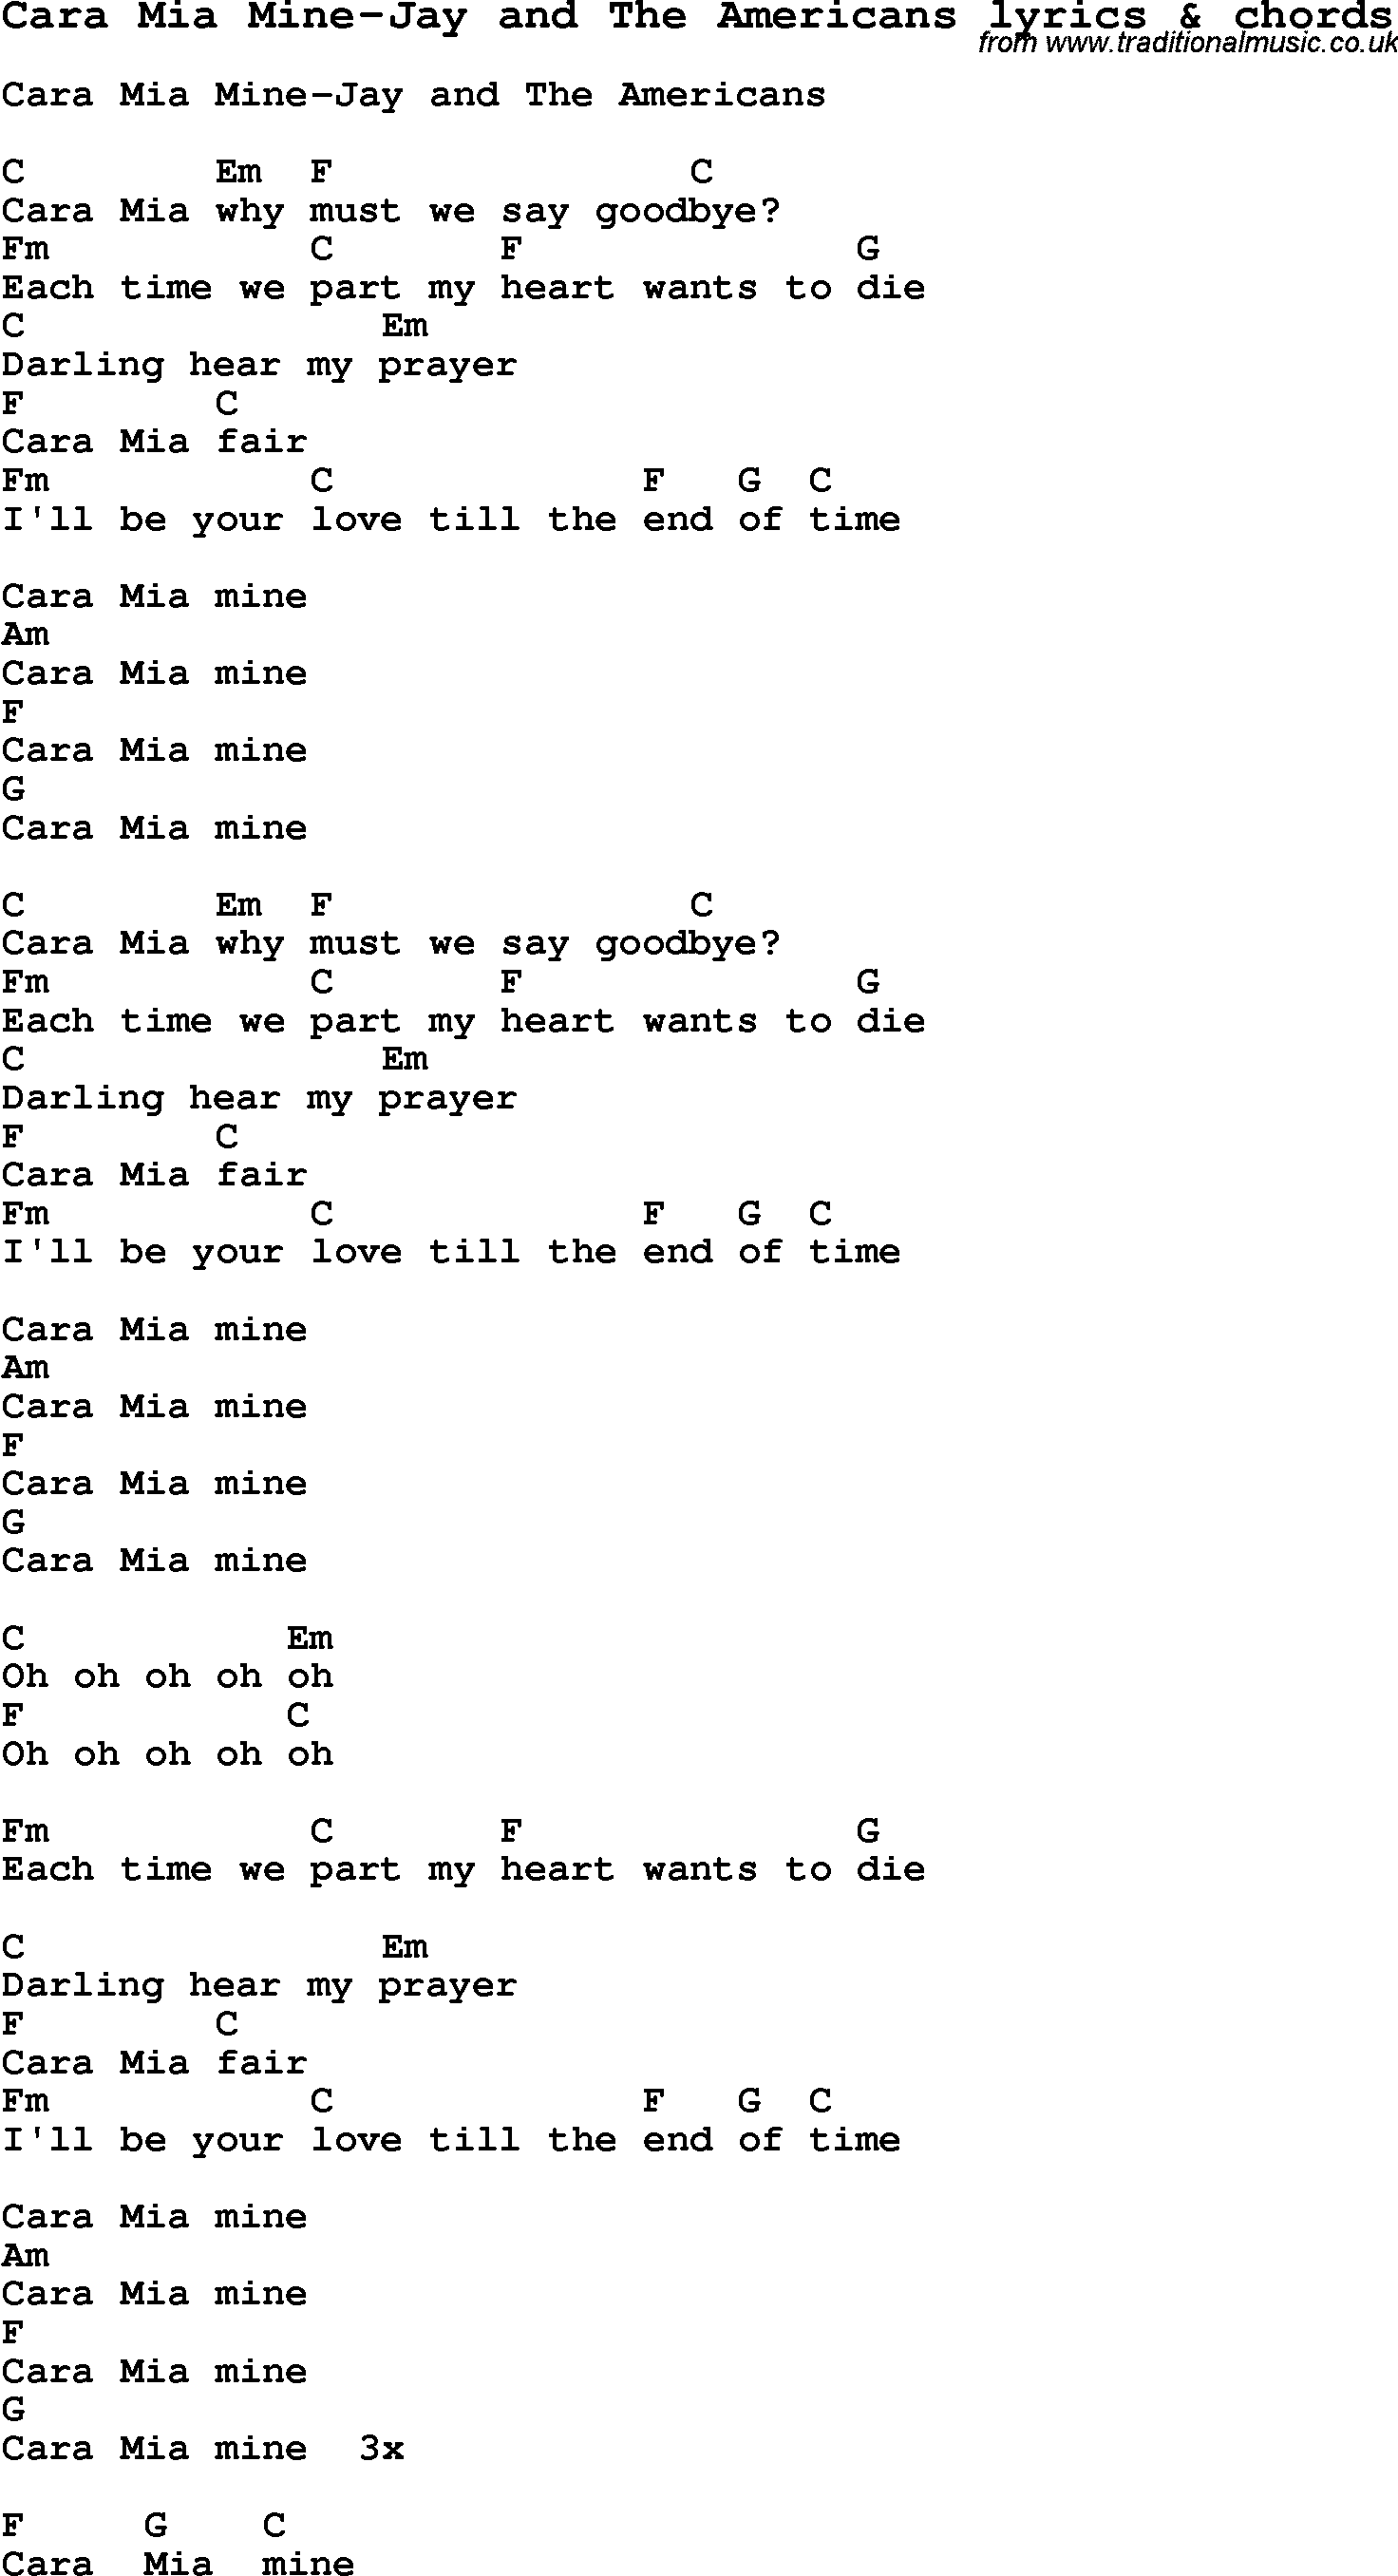 Love Song Lyrics for: Cara Mia Mine-Jay and The Americans with chords for Ukulele, Guitar Banjo etc.